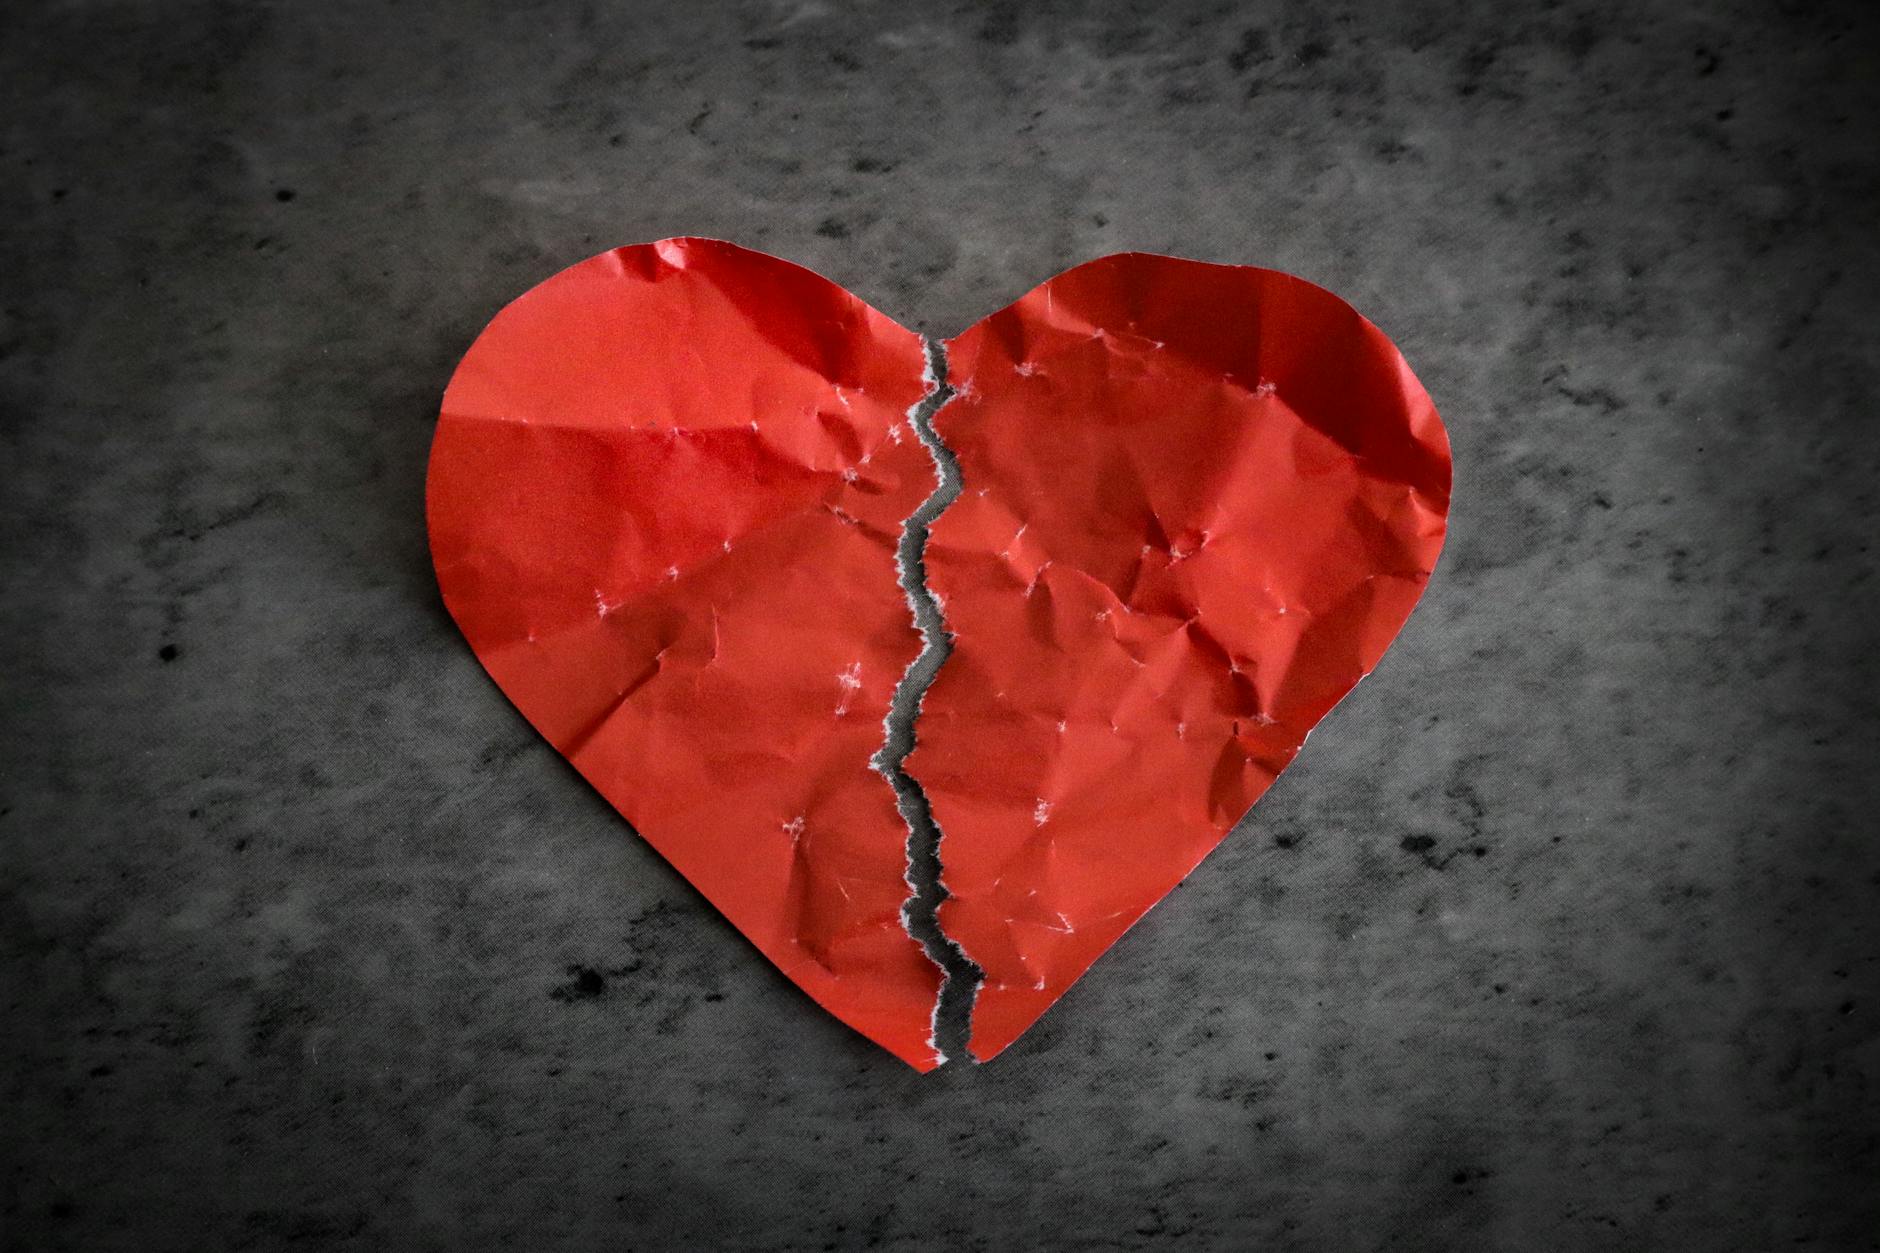 red paper heart ripped in half on dark background broken heart separation concept